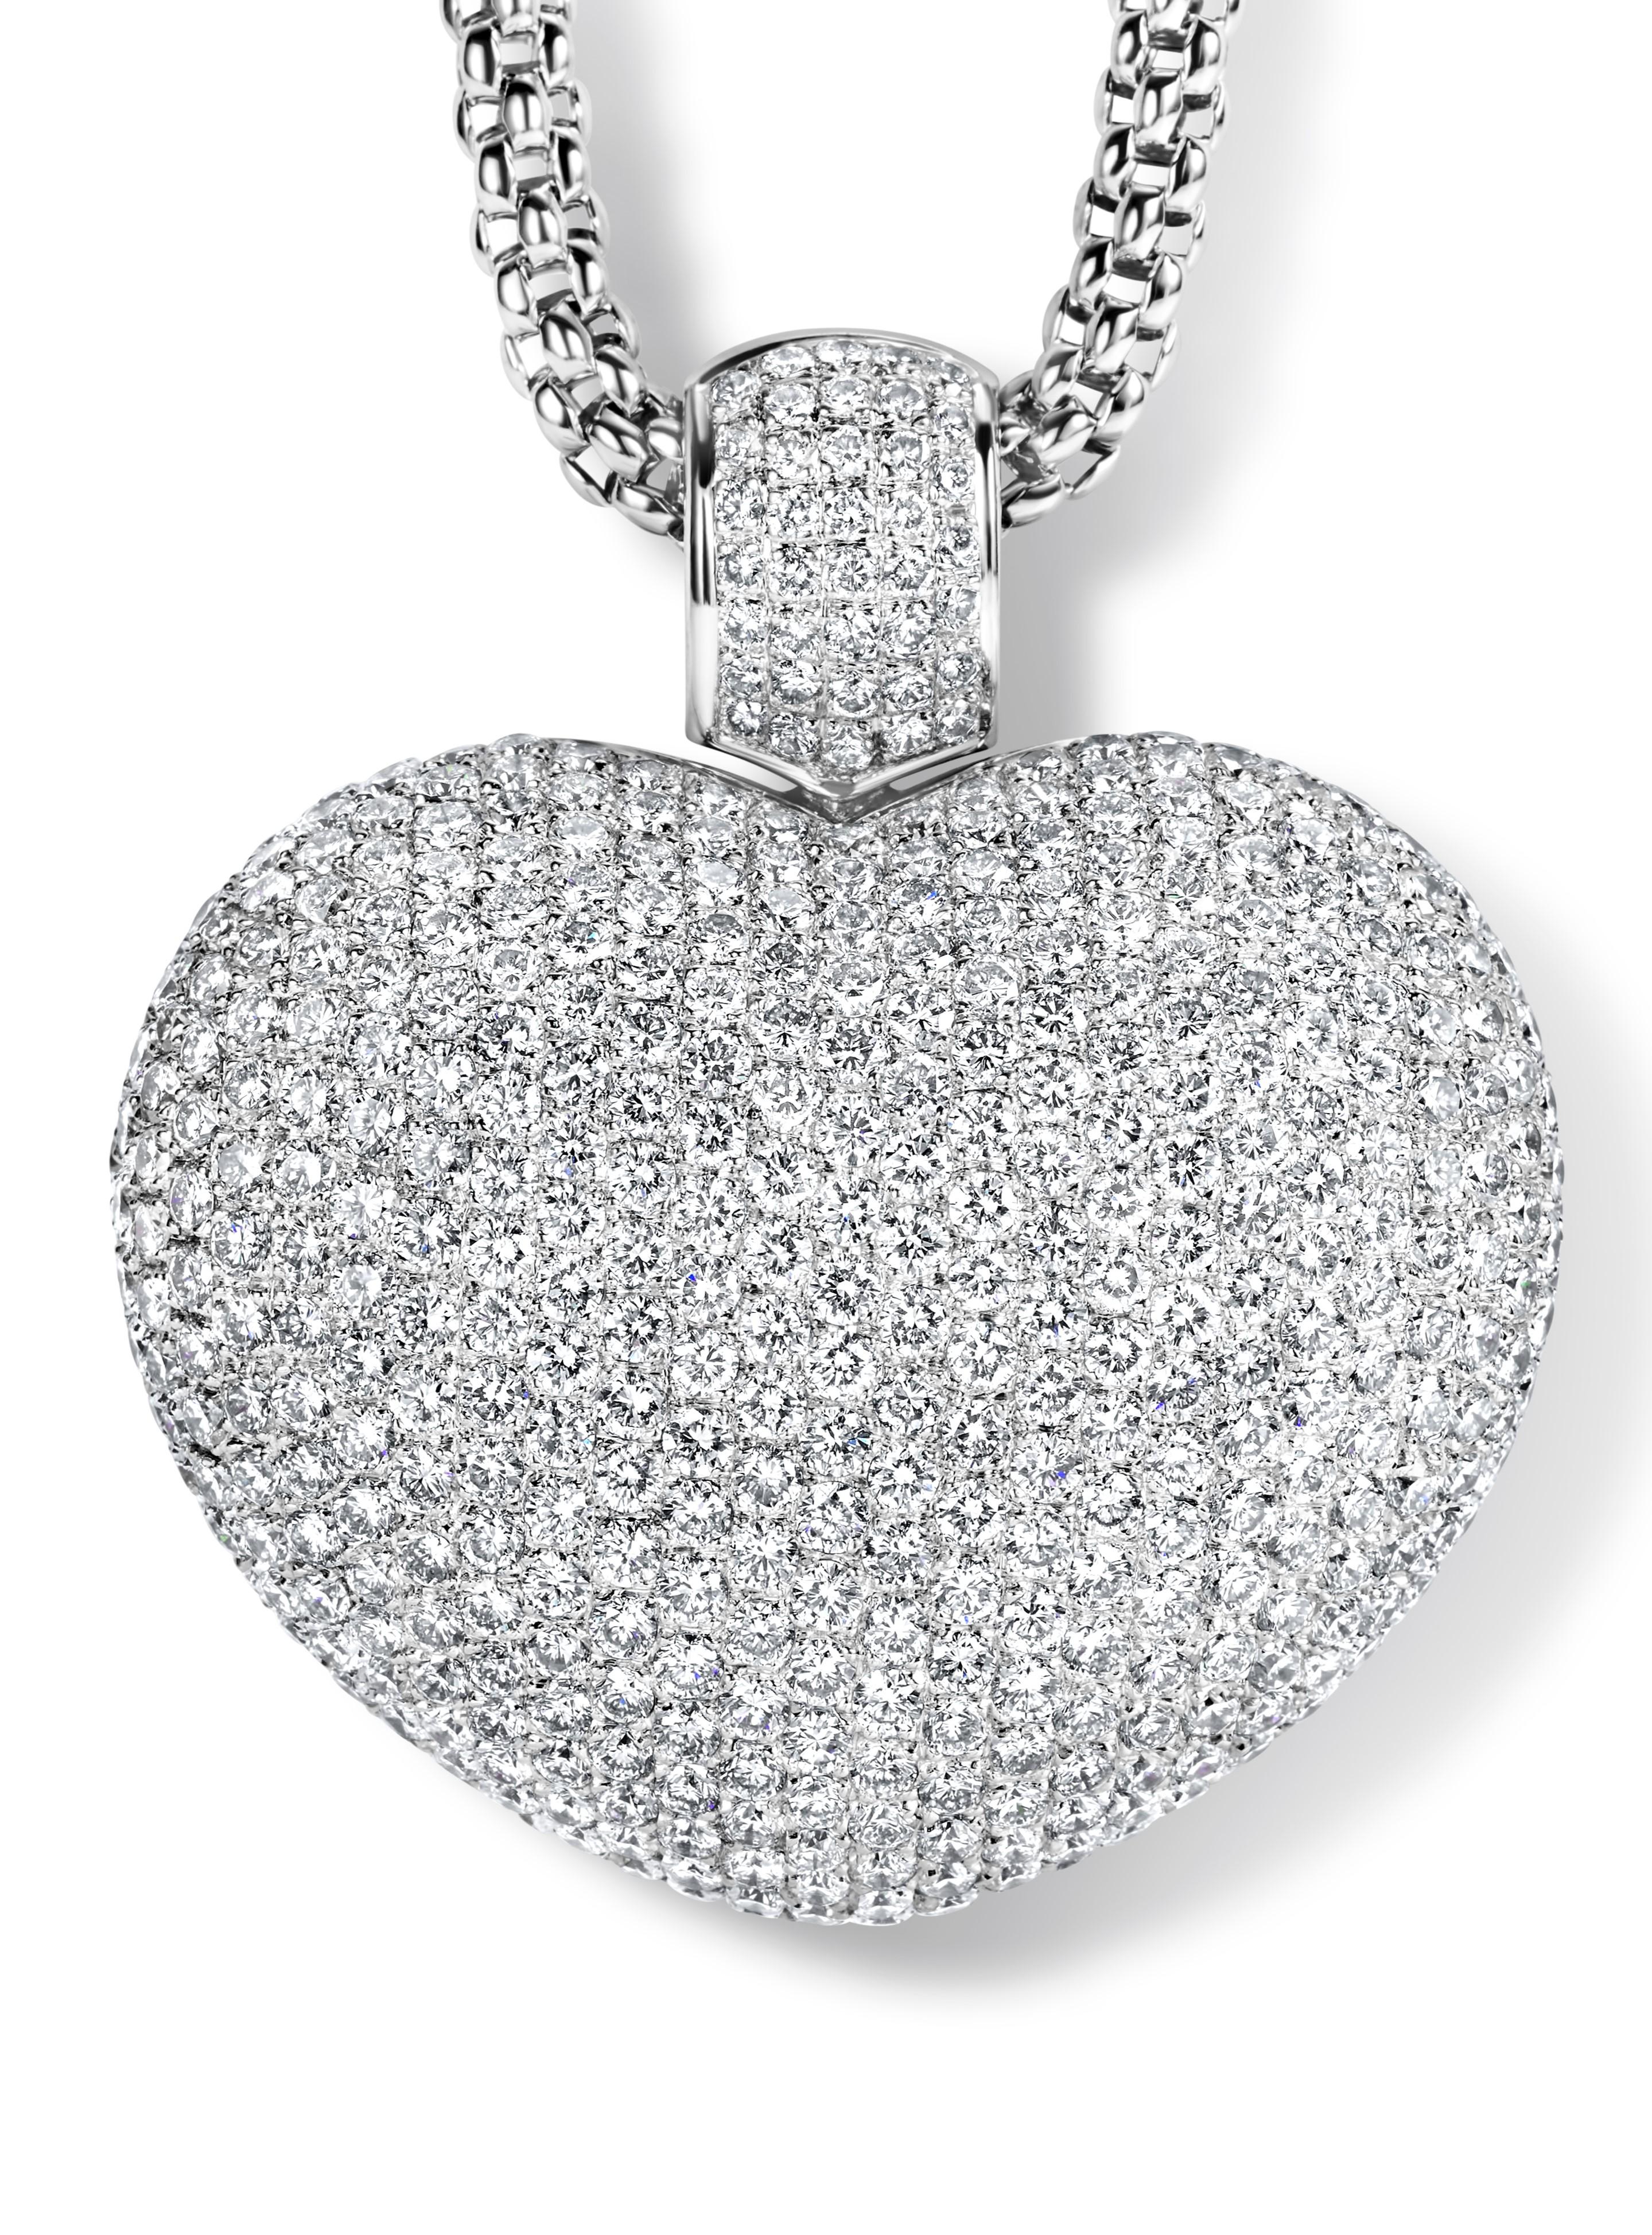 Brilliant Cut 18kt White Gold Heart Pendant With 17 ct. Diamonds With 18kt White Gold Necklace For Sale